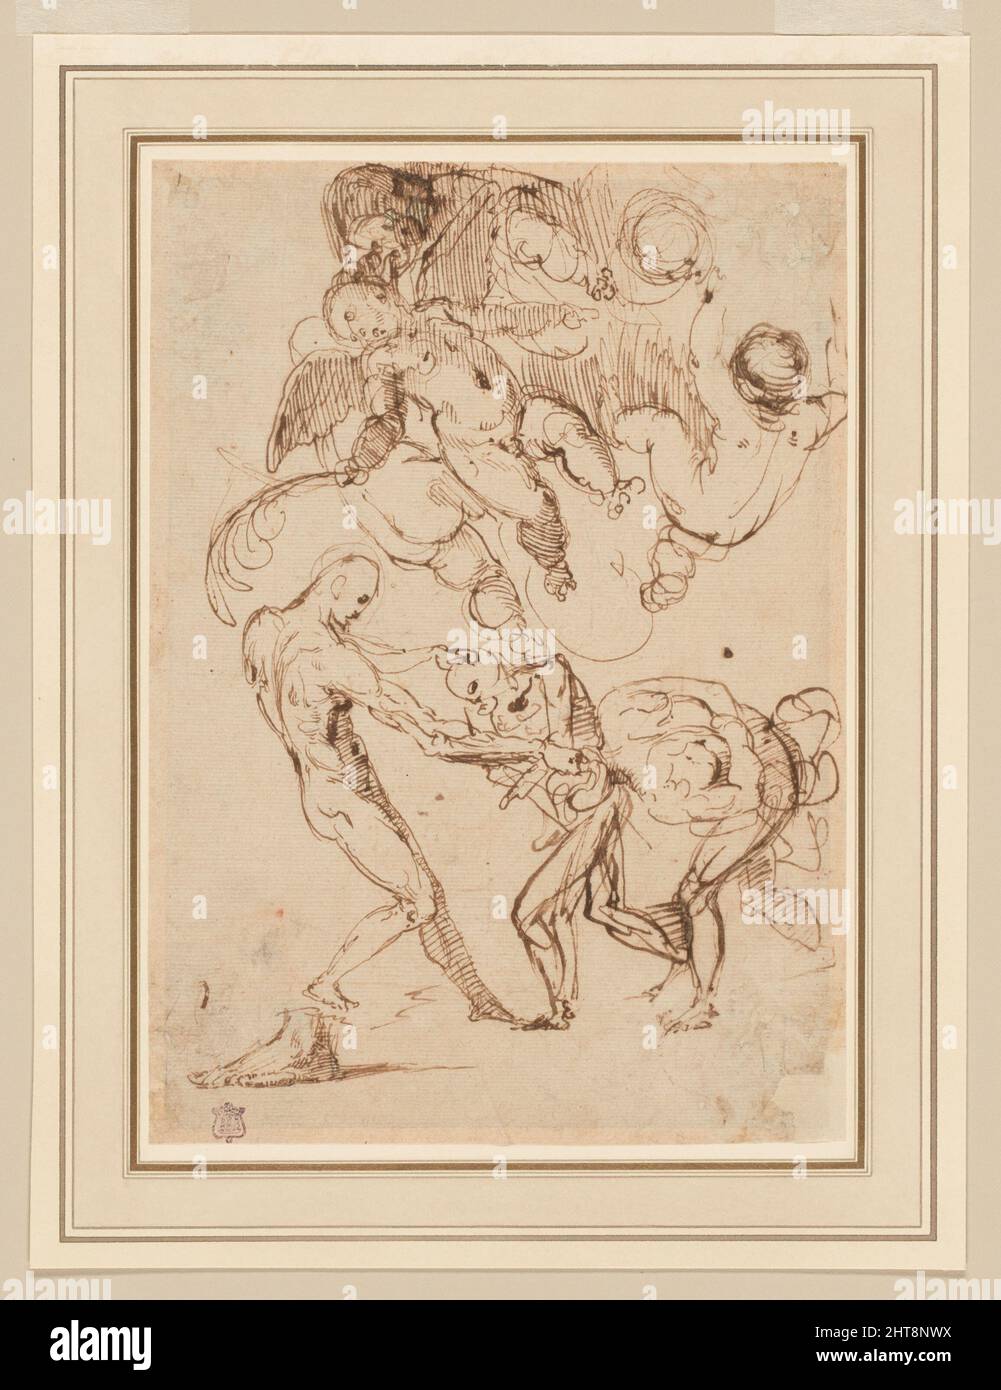 A Study of Bound Male Figures being Manhandled, and Various Putti, One Holding a Palm Frond, n.d. Stock Photo